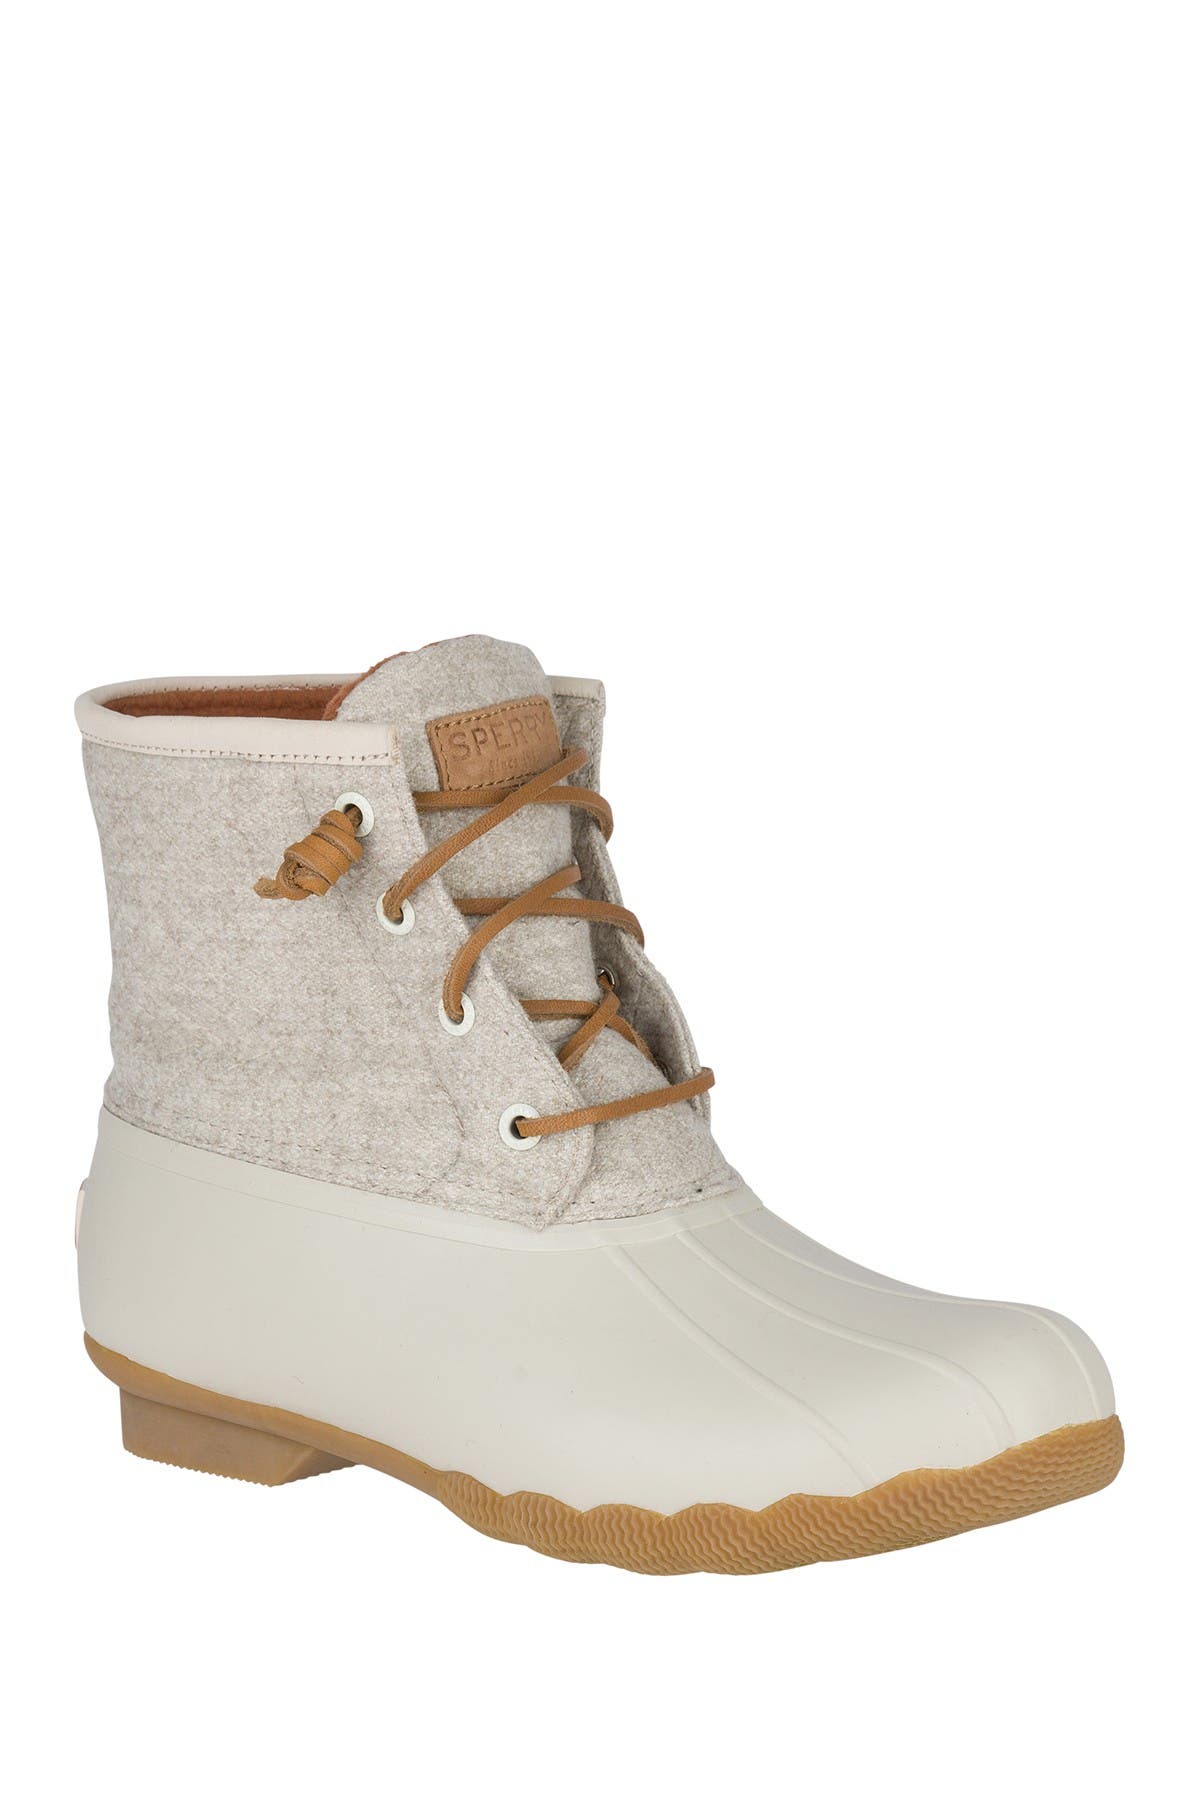 sperry duck boots off white wool